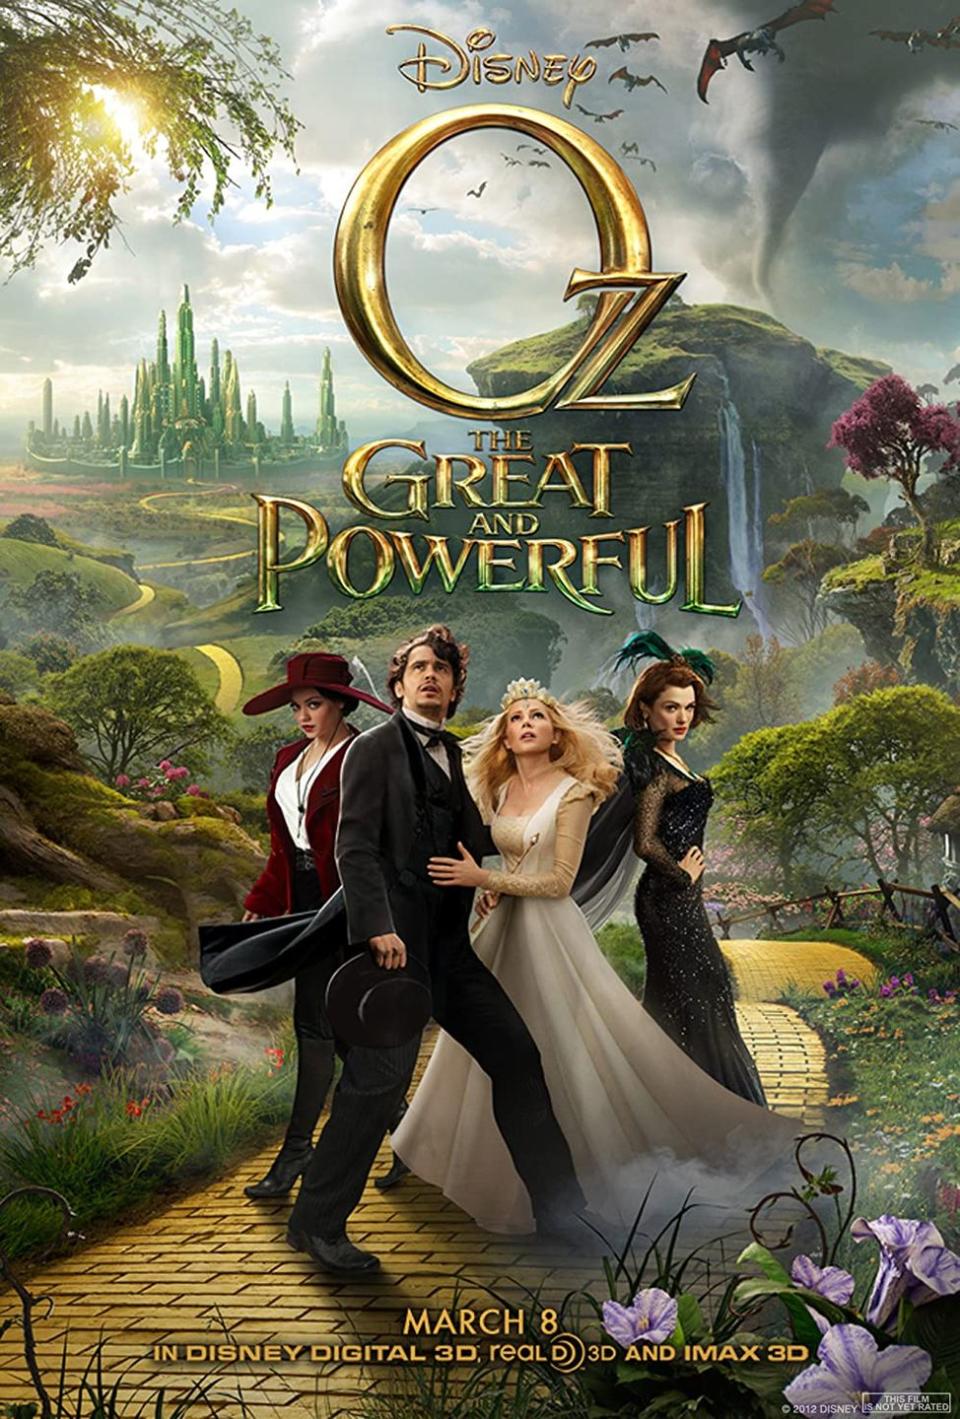 'Oz the Great and Powerful'